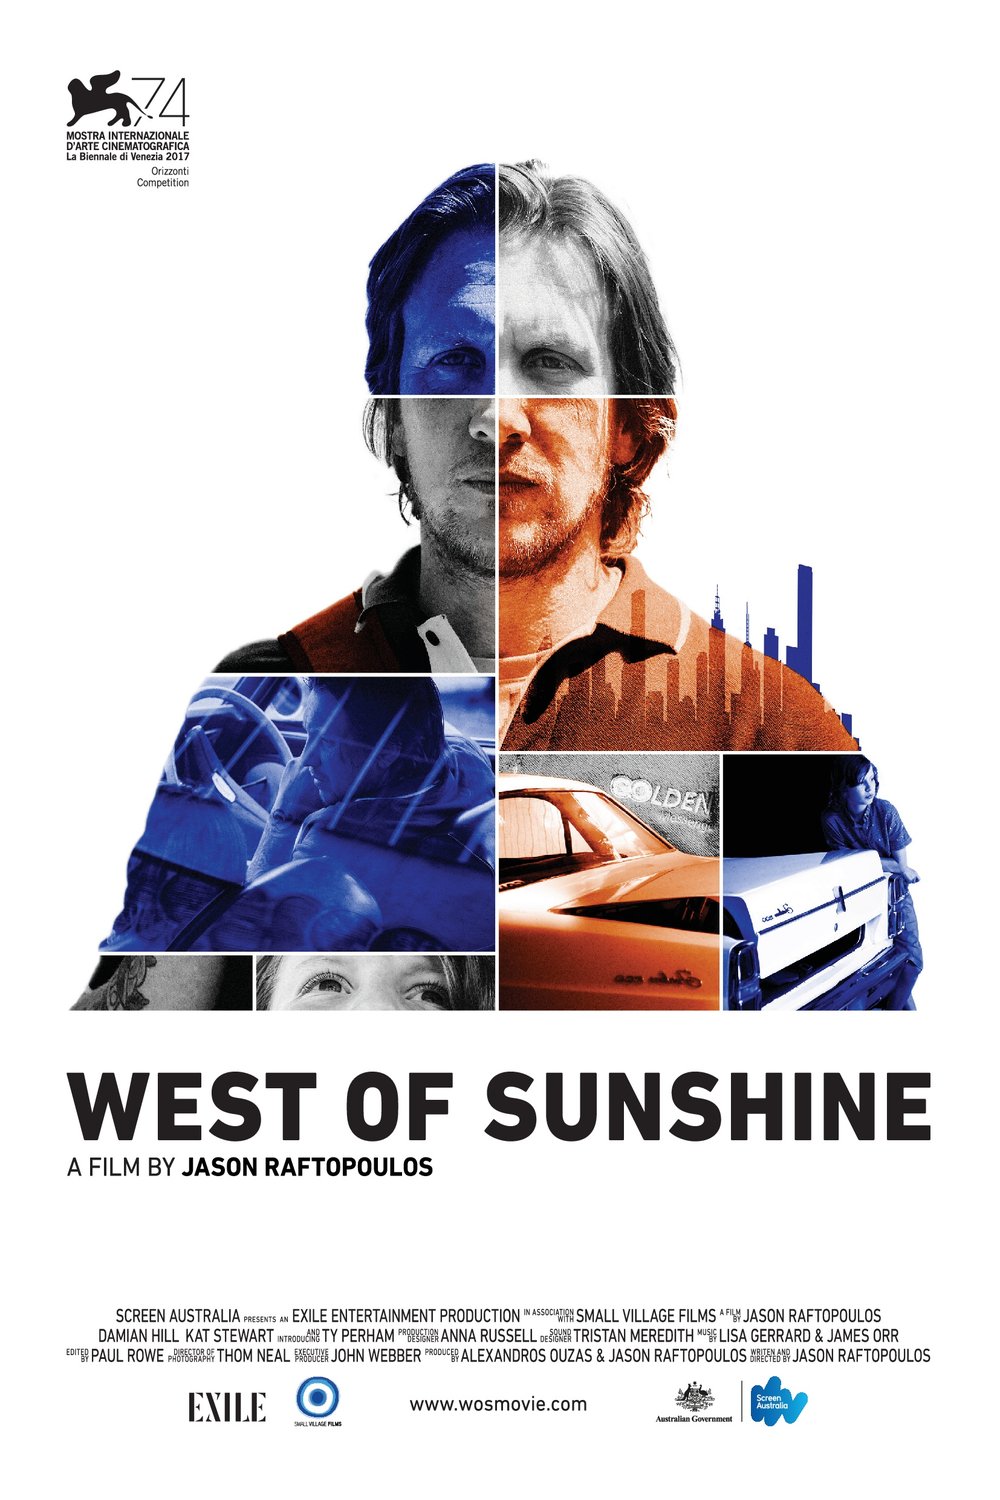 Poster of the movie West of Sunshine